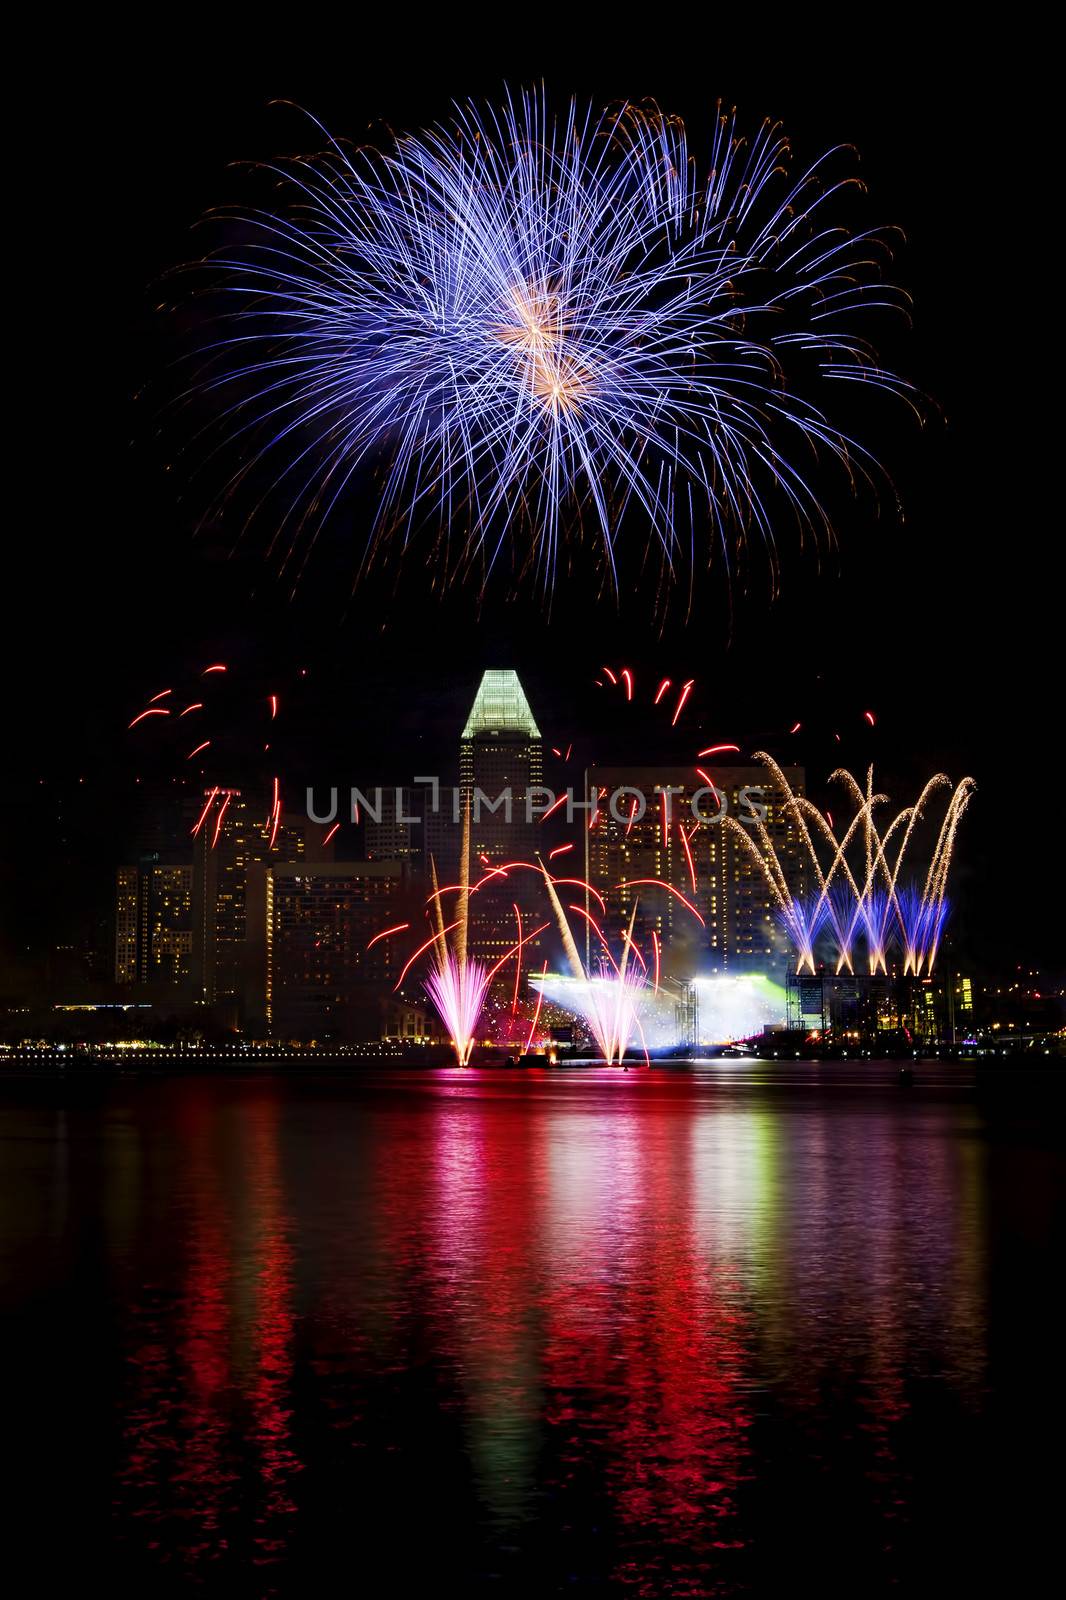 Fireworks over Marina bay in Singapore on National day rehersal